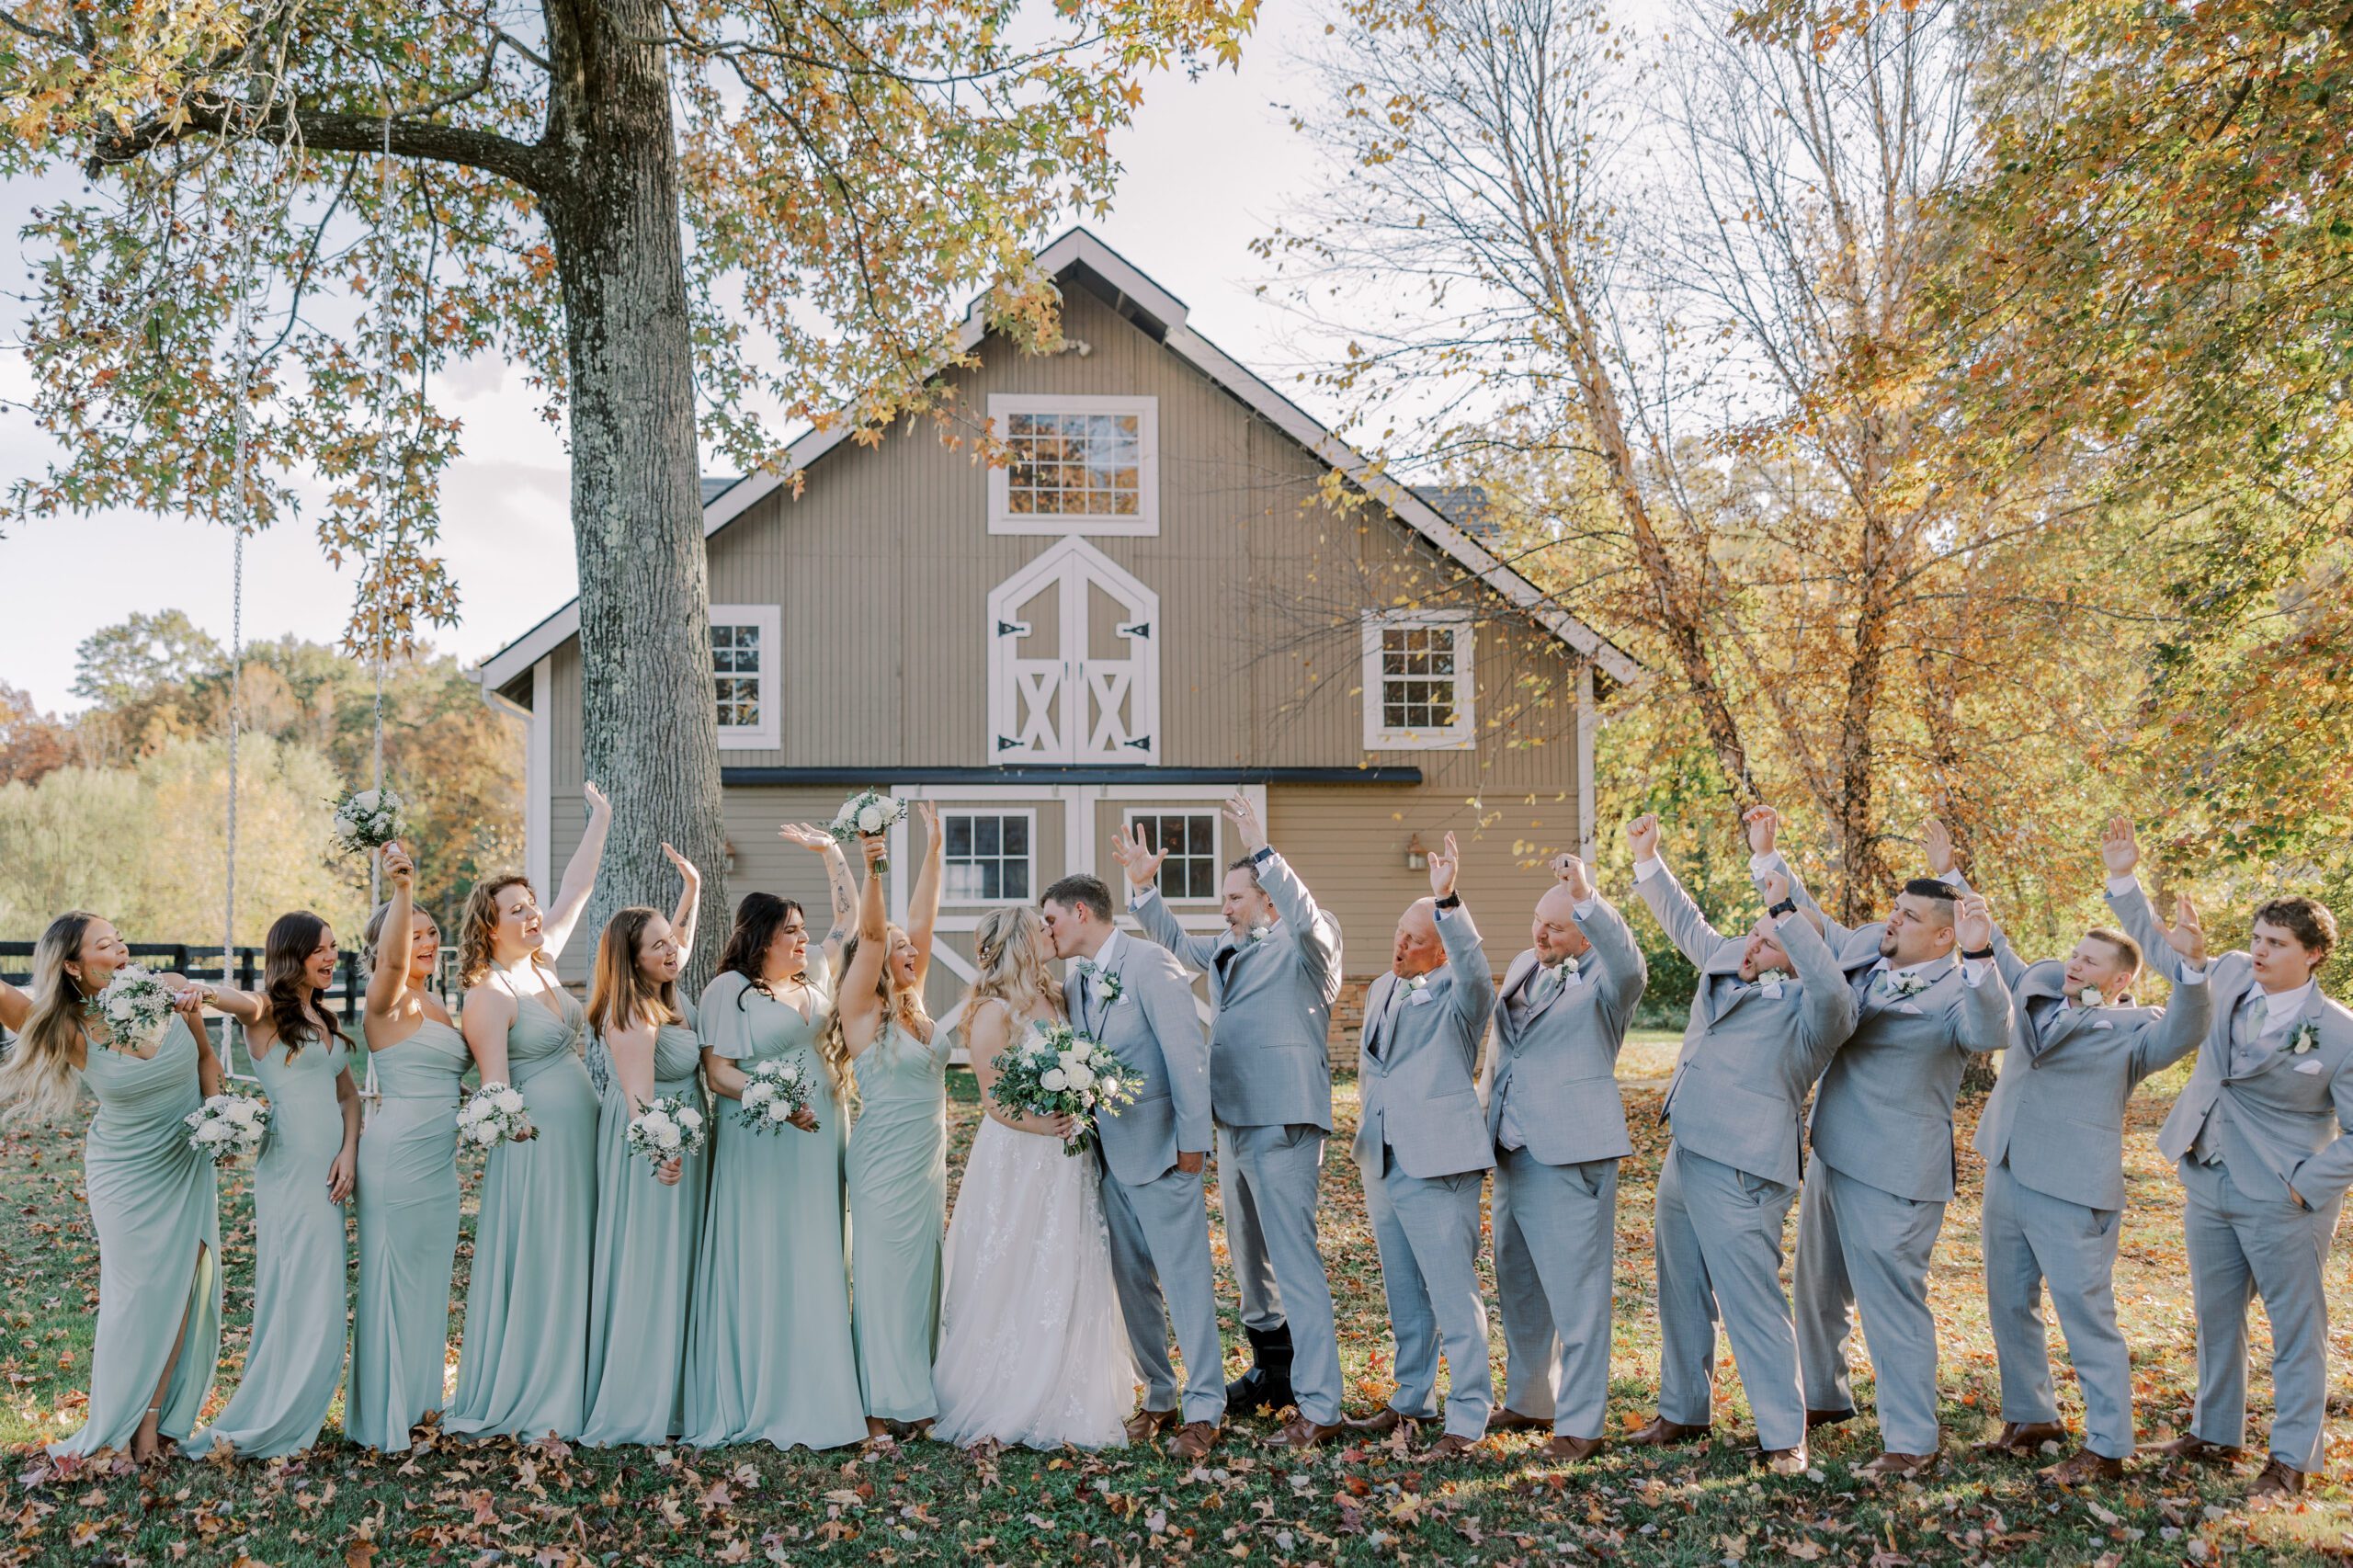 Wedding party standing in line, bride and groom in center kissing while everyone else cheers them on, light brown barn and trees are in background of photo